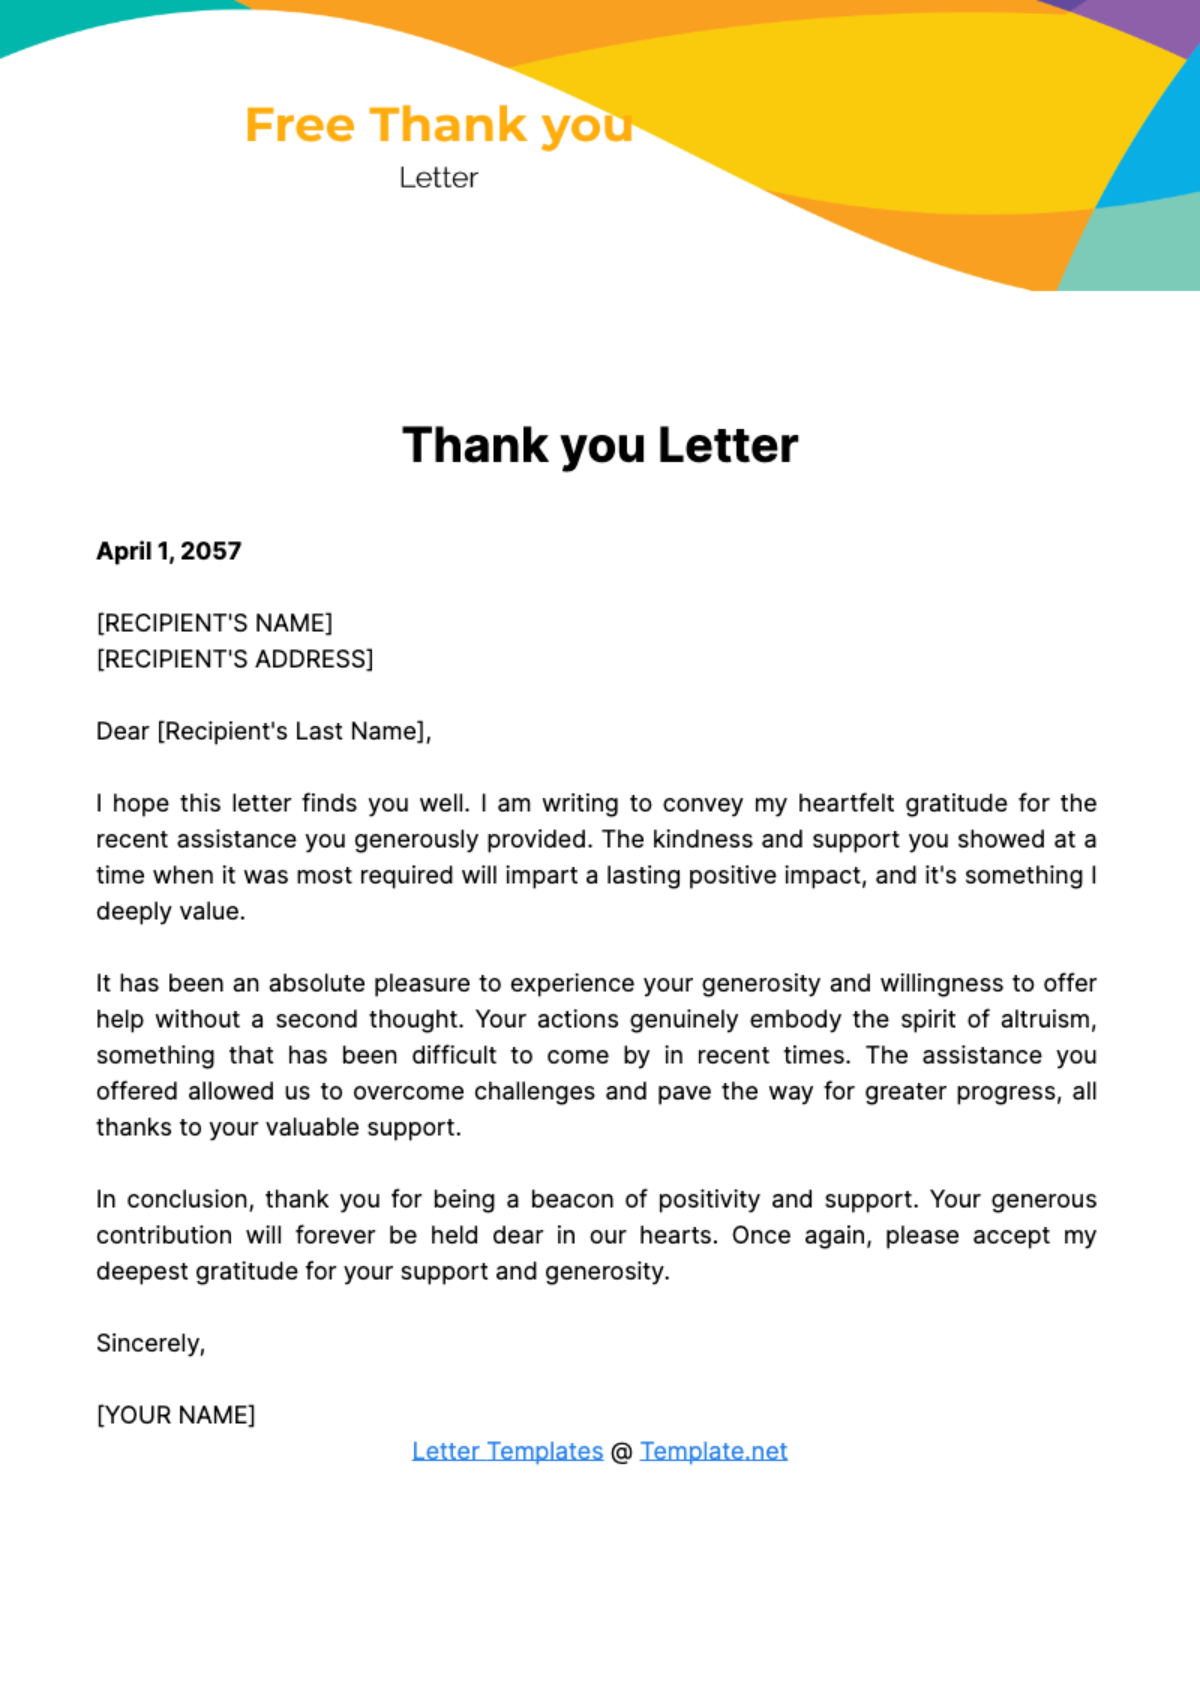 Free Thank you Letter Template